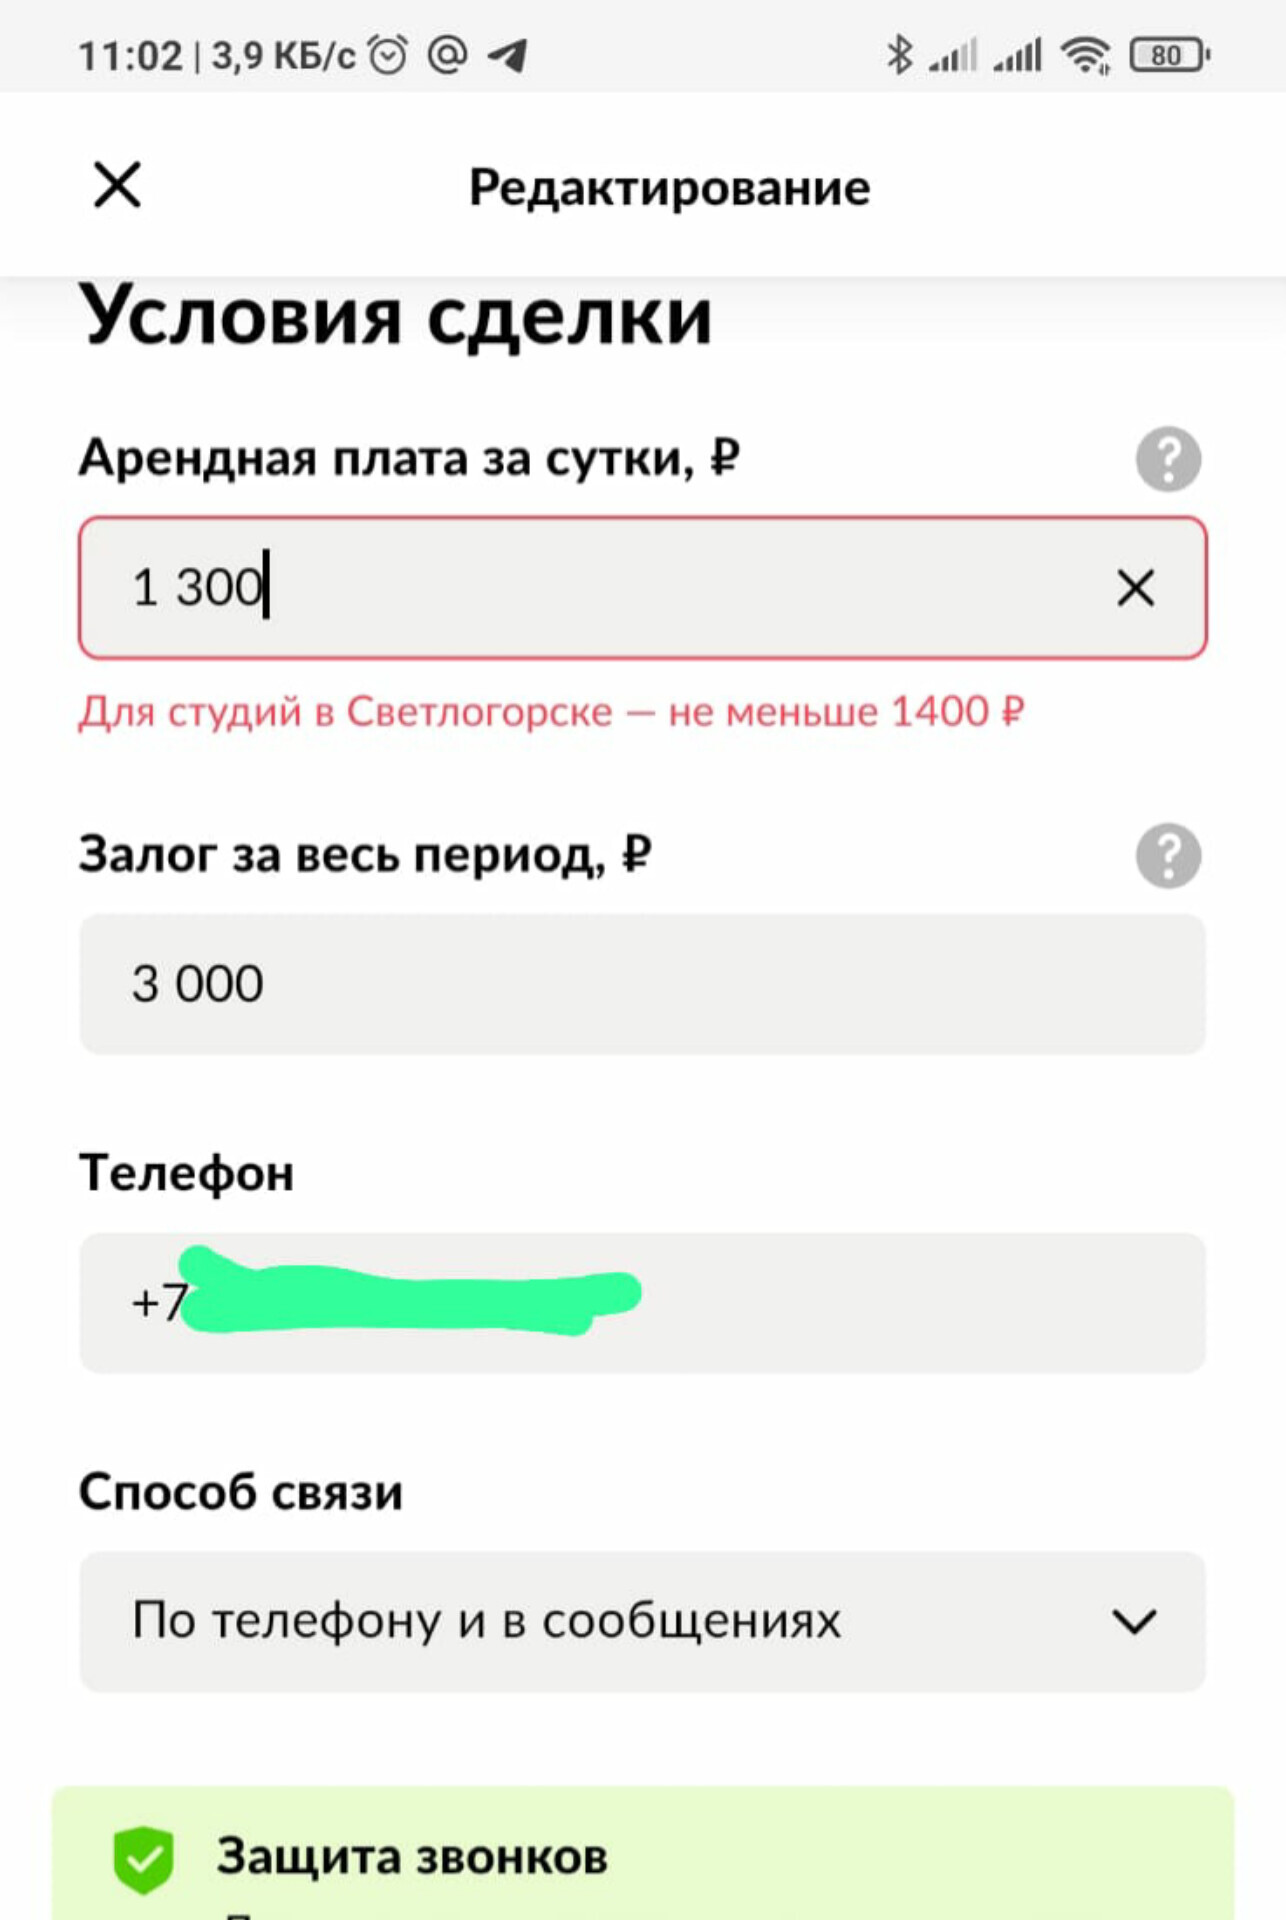 Avito now dictates at what price to rent an apartment - My, Avito, Announcement on avito, Svetlogorsk